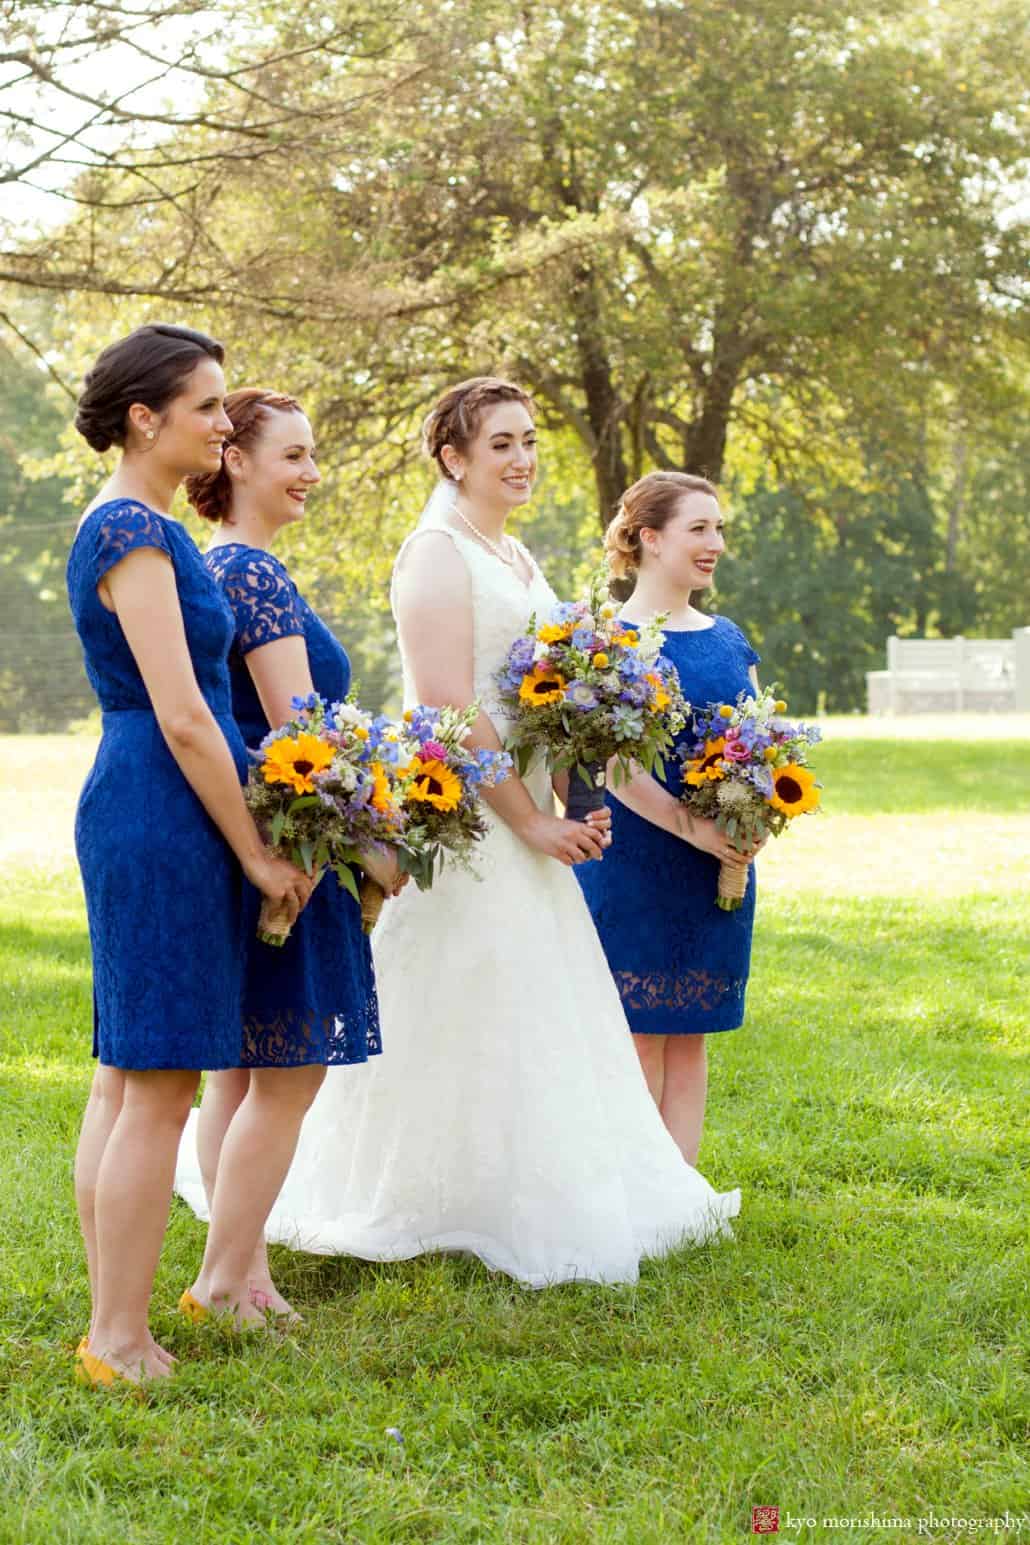 Bride and bridesmaids smile for pictures, holding cottage garden wedding bouquets by Cindy Rieken, photographed by Perona Farms wedding photographer Kyo Morishima